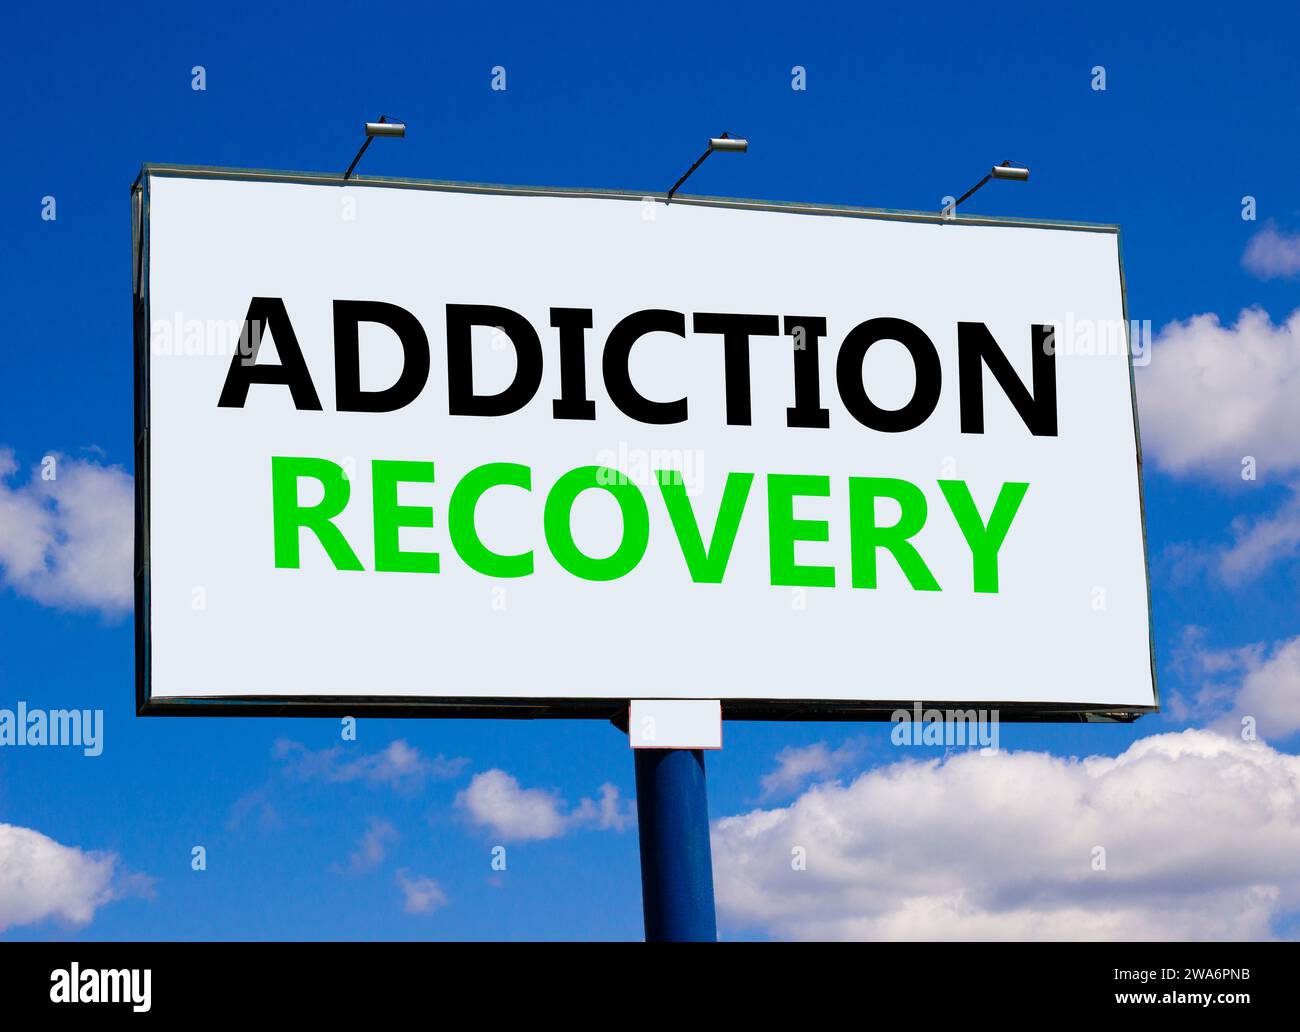 Addiction recovery symbol. Concept words Addiction recovery on beautiful white billboard. Beautiful blue sky white cloud background. Psychology addict Stock Photo